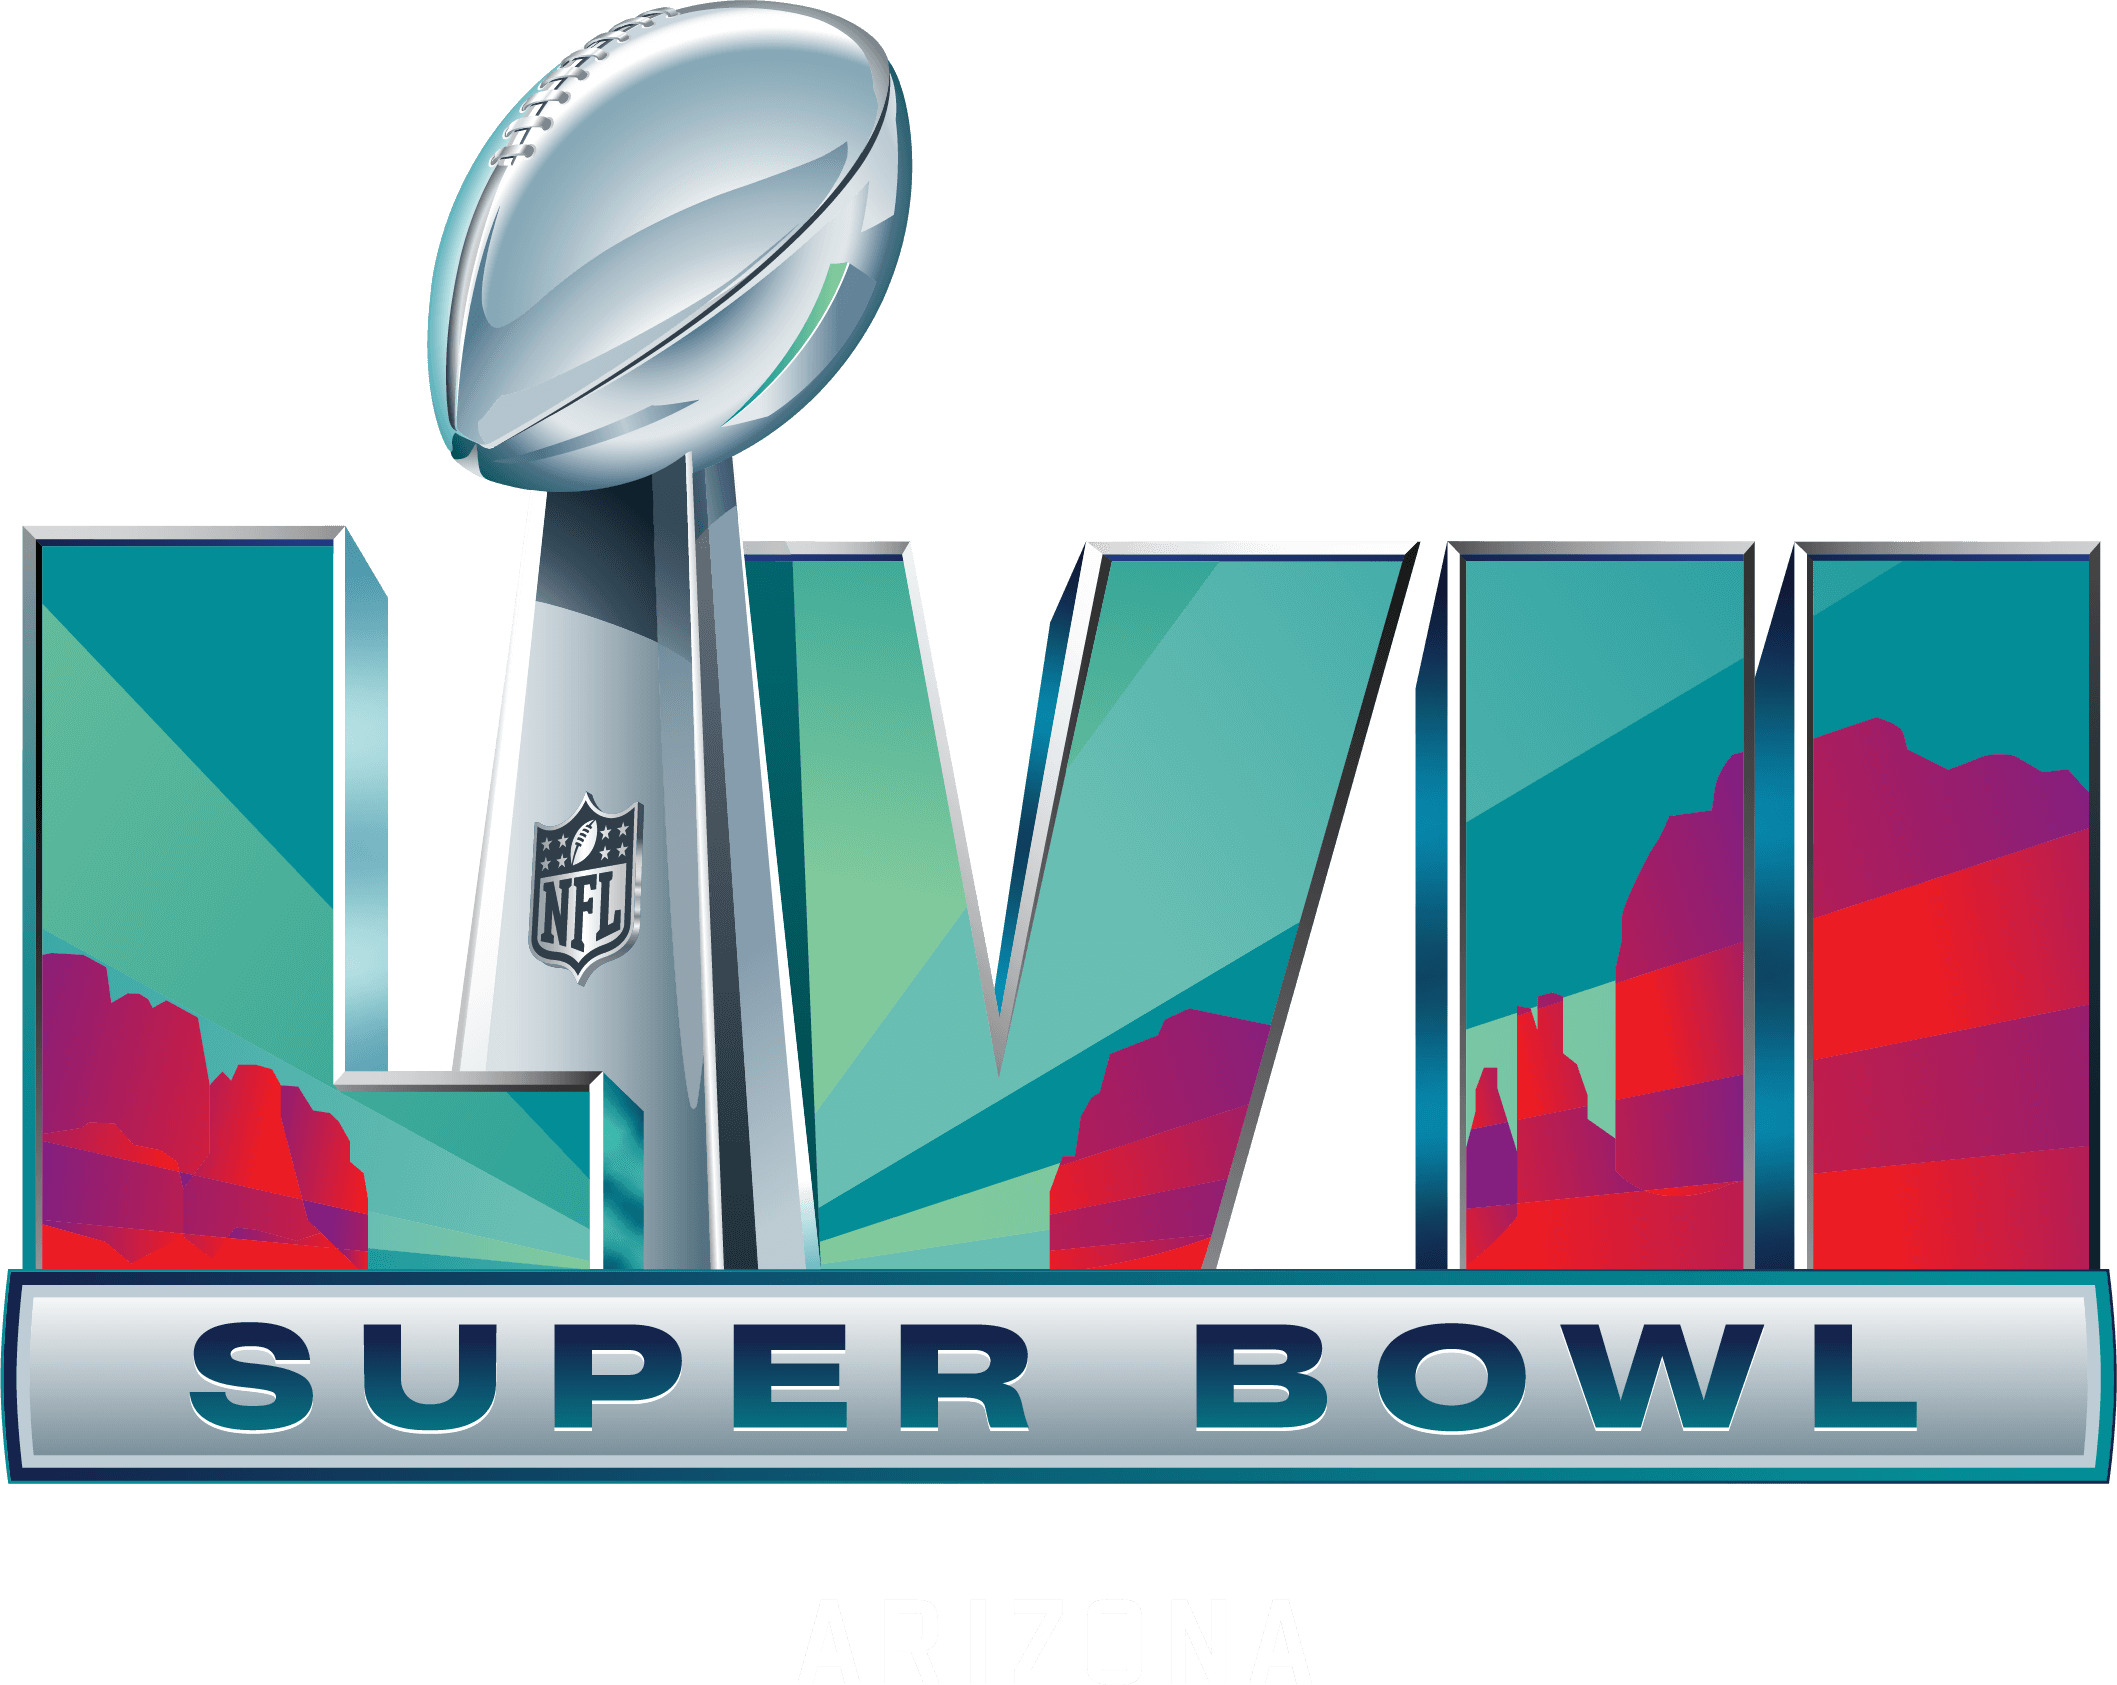 Covers.com and Caesars Sportsbook Team Up Ahead of Super Bowl LVII